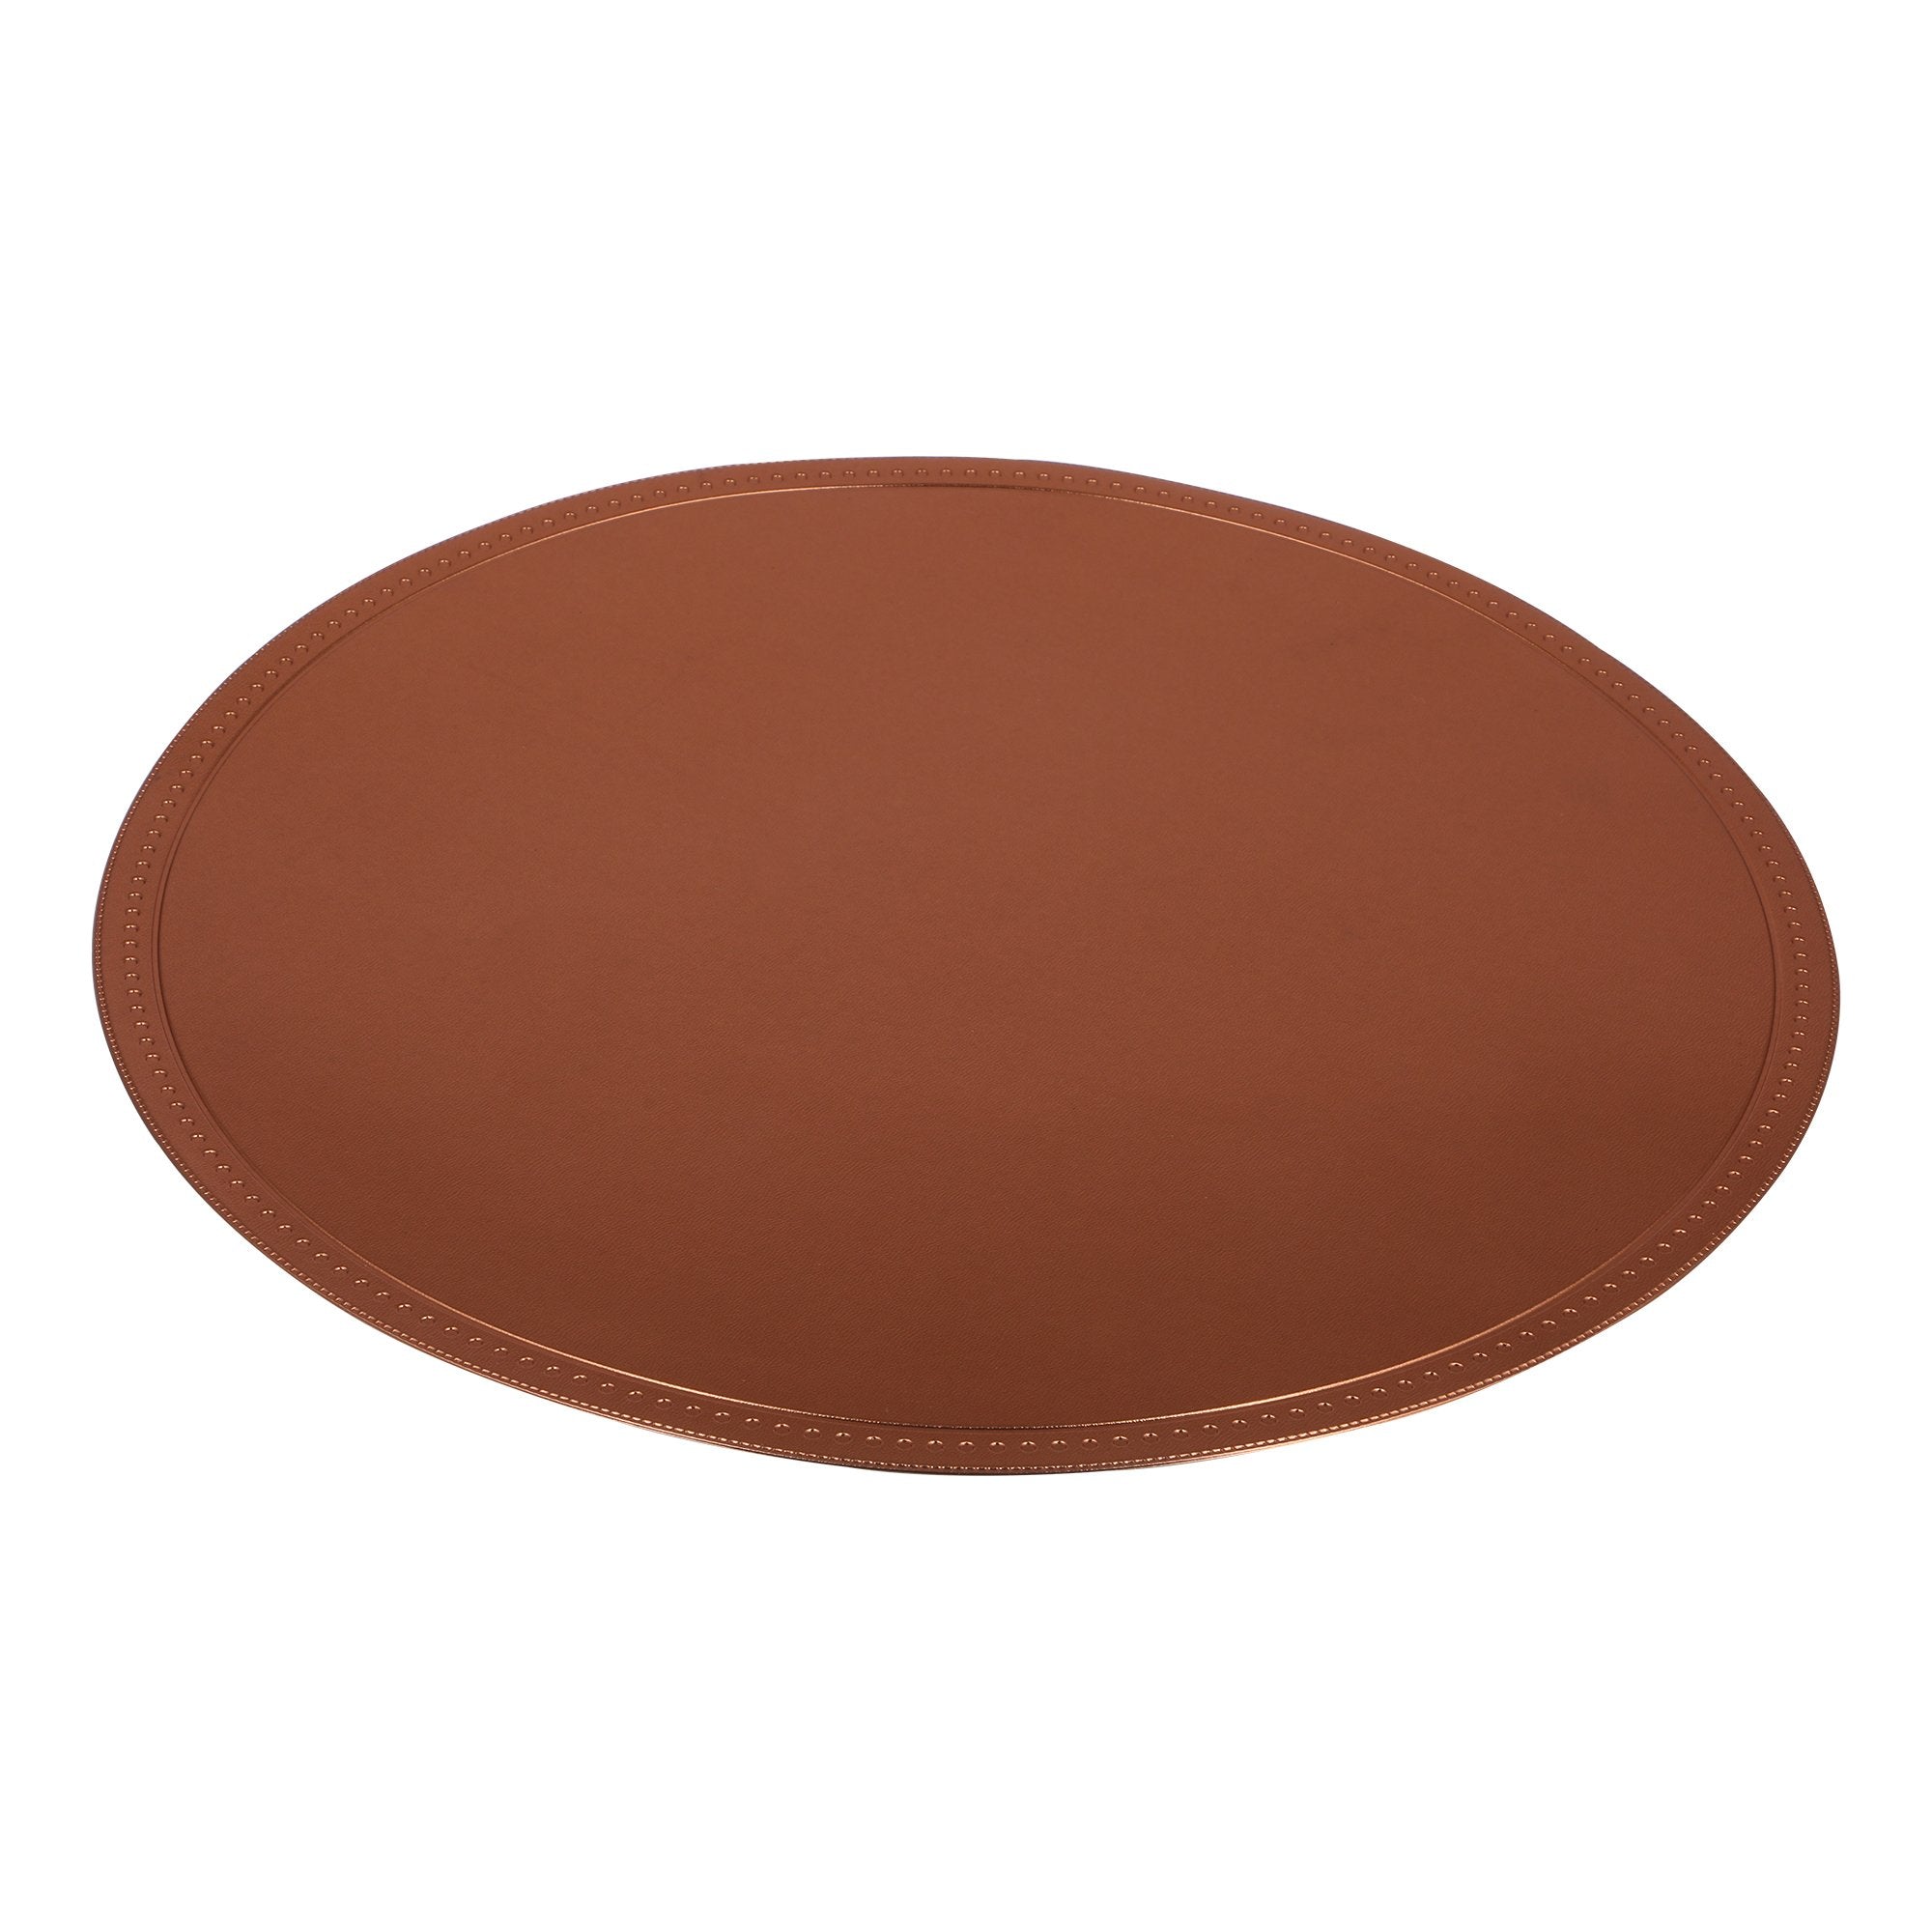 Set of 6 pcs PU Leather Place Mats, Best for Dining Table/Bedside Table, Center Table (Round 15X15 Inch)